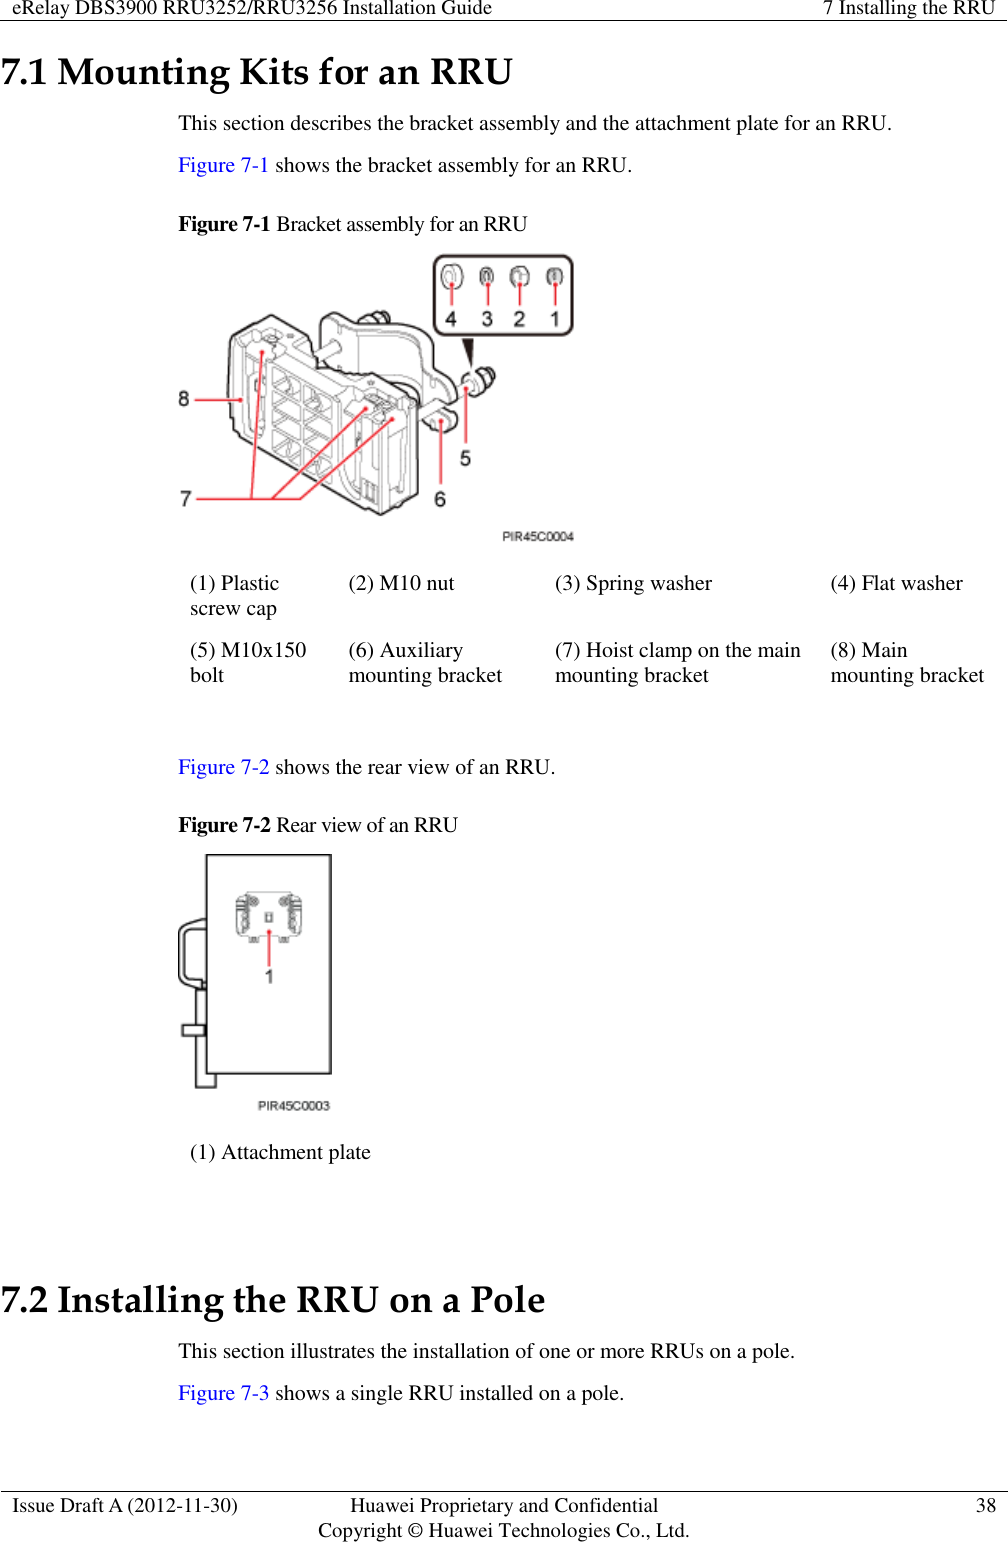 eRelay DBS3900 RRU3252/RRU3256 Installation Guide 7 Installing the RRU  Issue Draft A (2012-11-30) Huawei Proprietary and Confidential                                     Copyright © Huawei Technologies Co., Ltd. 38  7.1 Mounting Kits for an RRU This section describes the bracket assembly and the attachment plate for an RRU. Figure 7-1 shows the bracket assembly for an RRU. Figure 7-1 Bracket assembly for an RRU  (1) Plastic screw cap (2) M10 nut (3) Spring washer (4) Flat washer (5) M10x150 bolt (6) Auxiliary mounting bracket (7) Hoist clamp on the main mounting bracket (8) Main mounting bracket  Figure 7-2 shows the rear view of an RRU. Figure 7-2 Rear view of an RRU  (1) Attachment plate  7.2 Installing the RRU on a Pole This section illustrates the installation of one or more RRUs on a pole. Figure 7-3 shows a single RRU installed on a pole. 